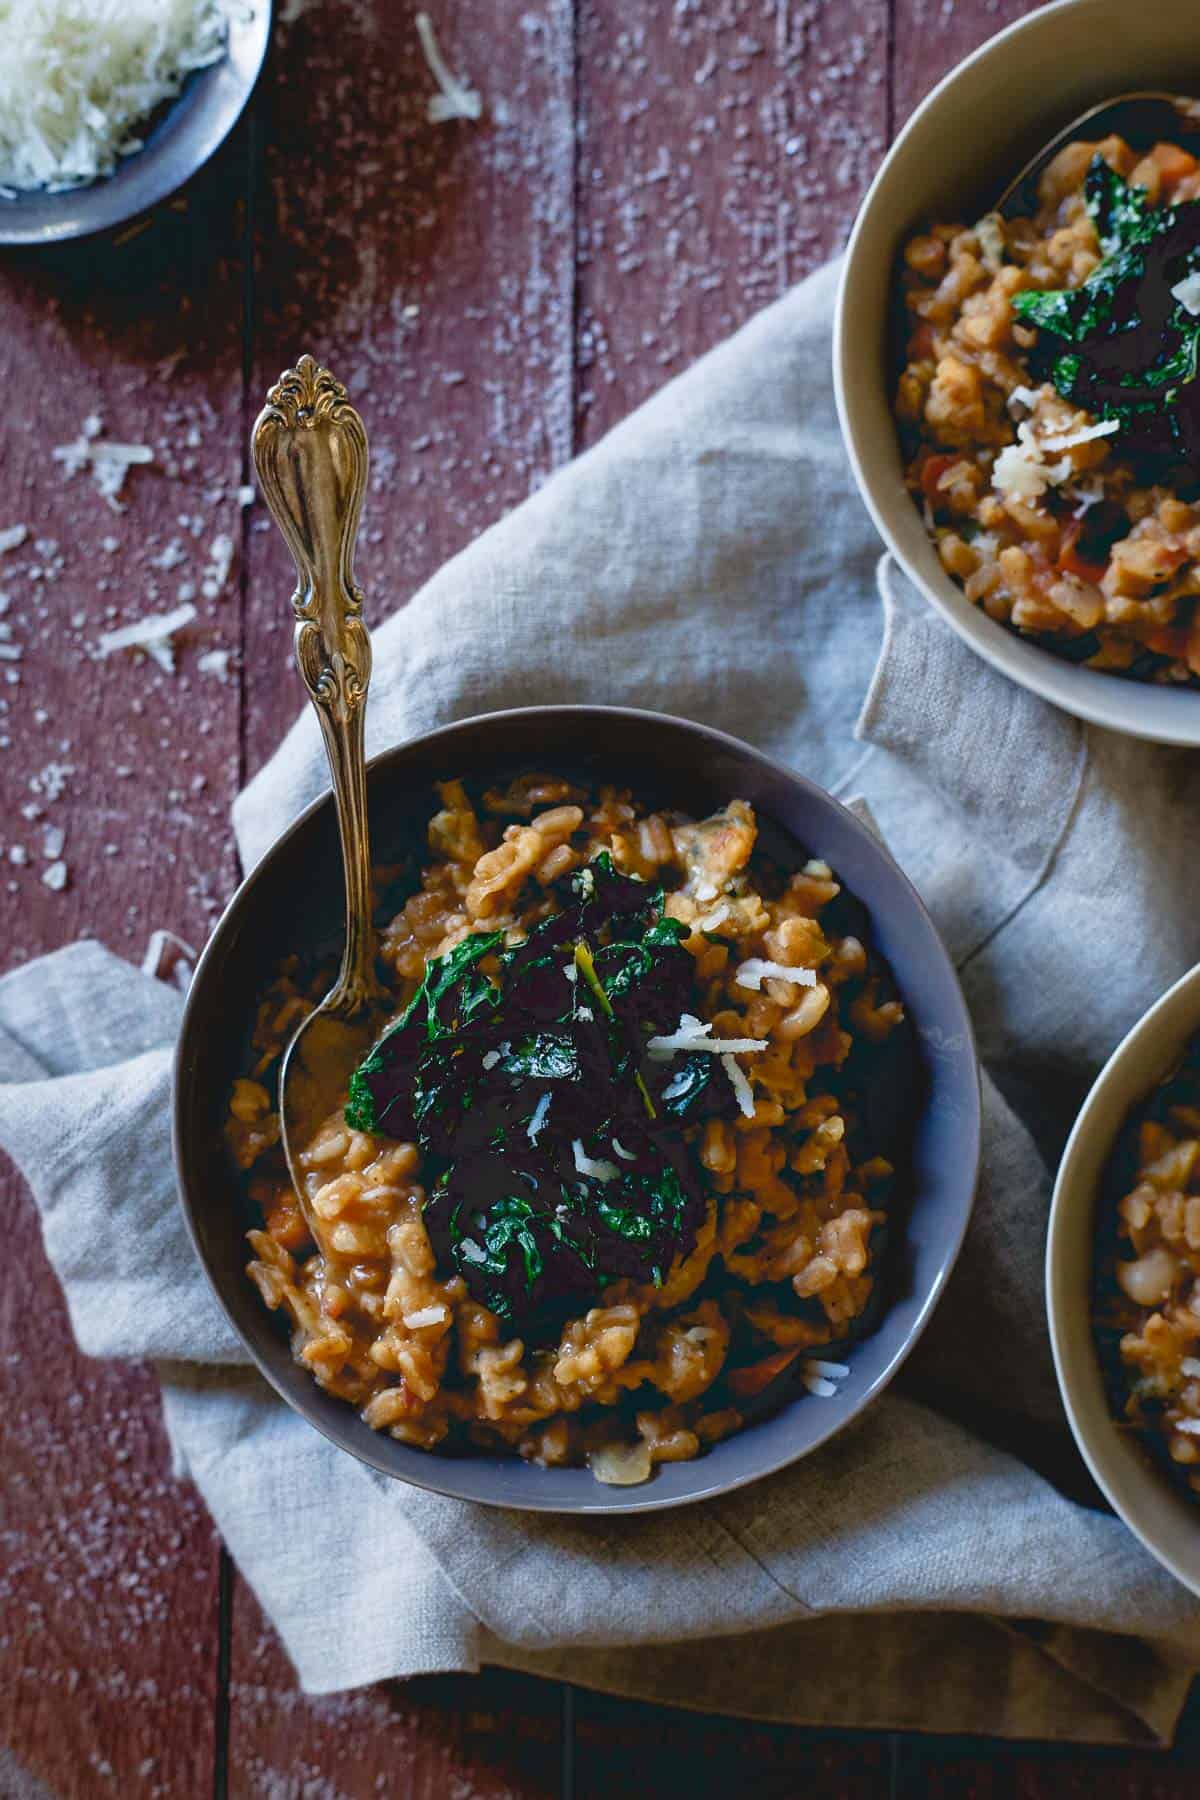 This Tuscan white bean farro risotto is warm, comforting, hearty and a healthy way to ring in the New Year. Made using Tuscan white bean soup, it’s packed with way more flavor than your typical risotto.